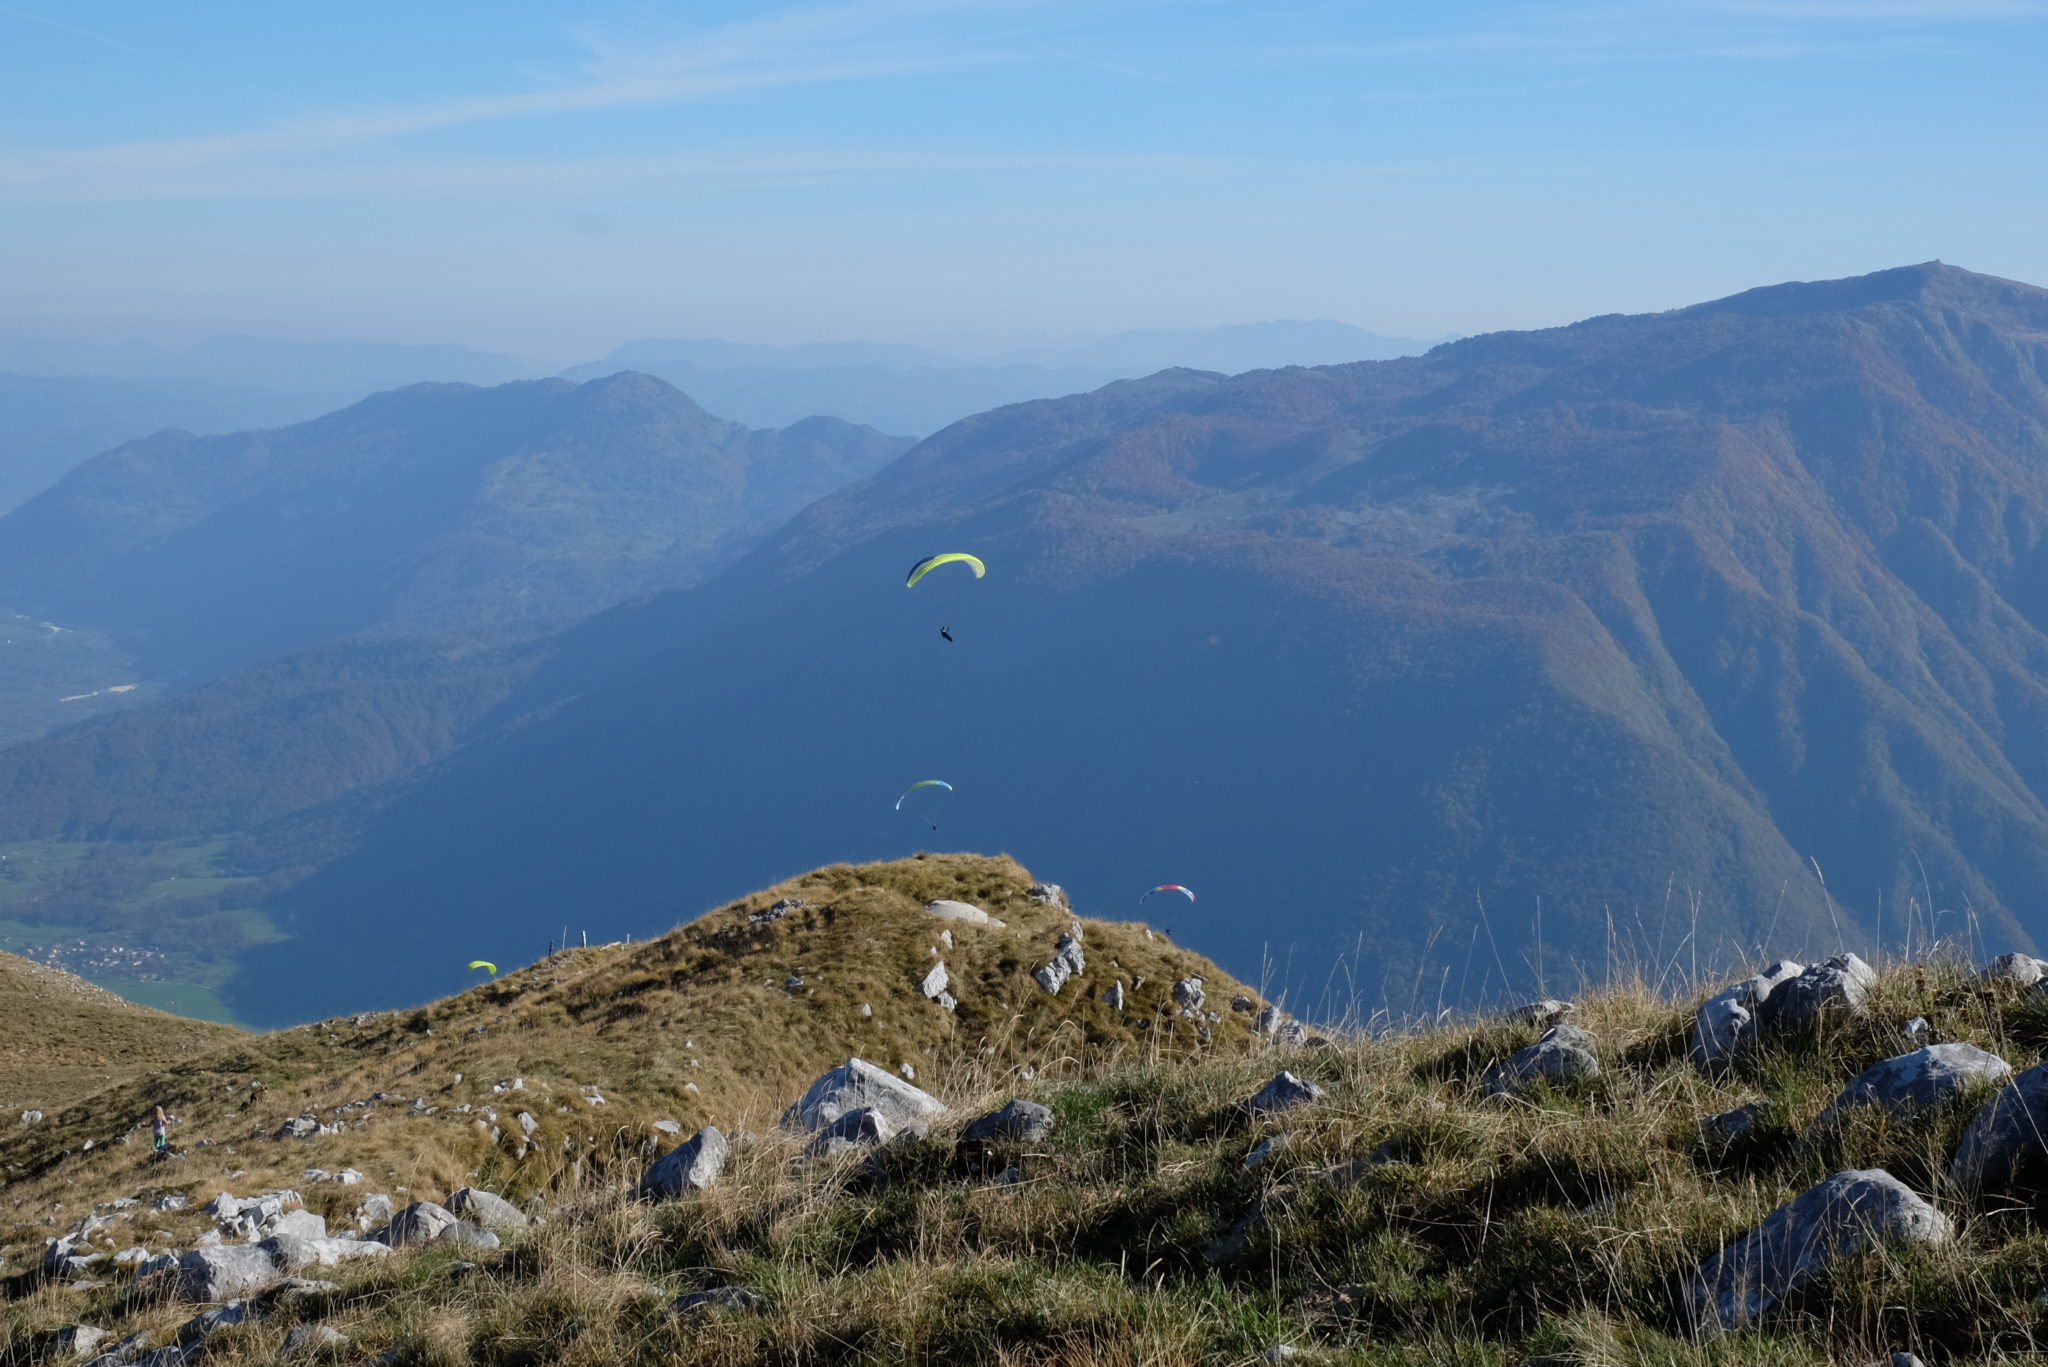 Kobariški Stol is also favored by paragliders and downhill riders. If we hiked up as a family, my 20-years-old nephew Lovro brought along his paraglider and jumped from just beneath the top of Kobariški Stol towards Kobarid. Slovenia